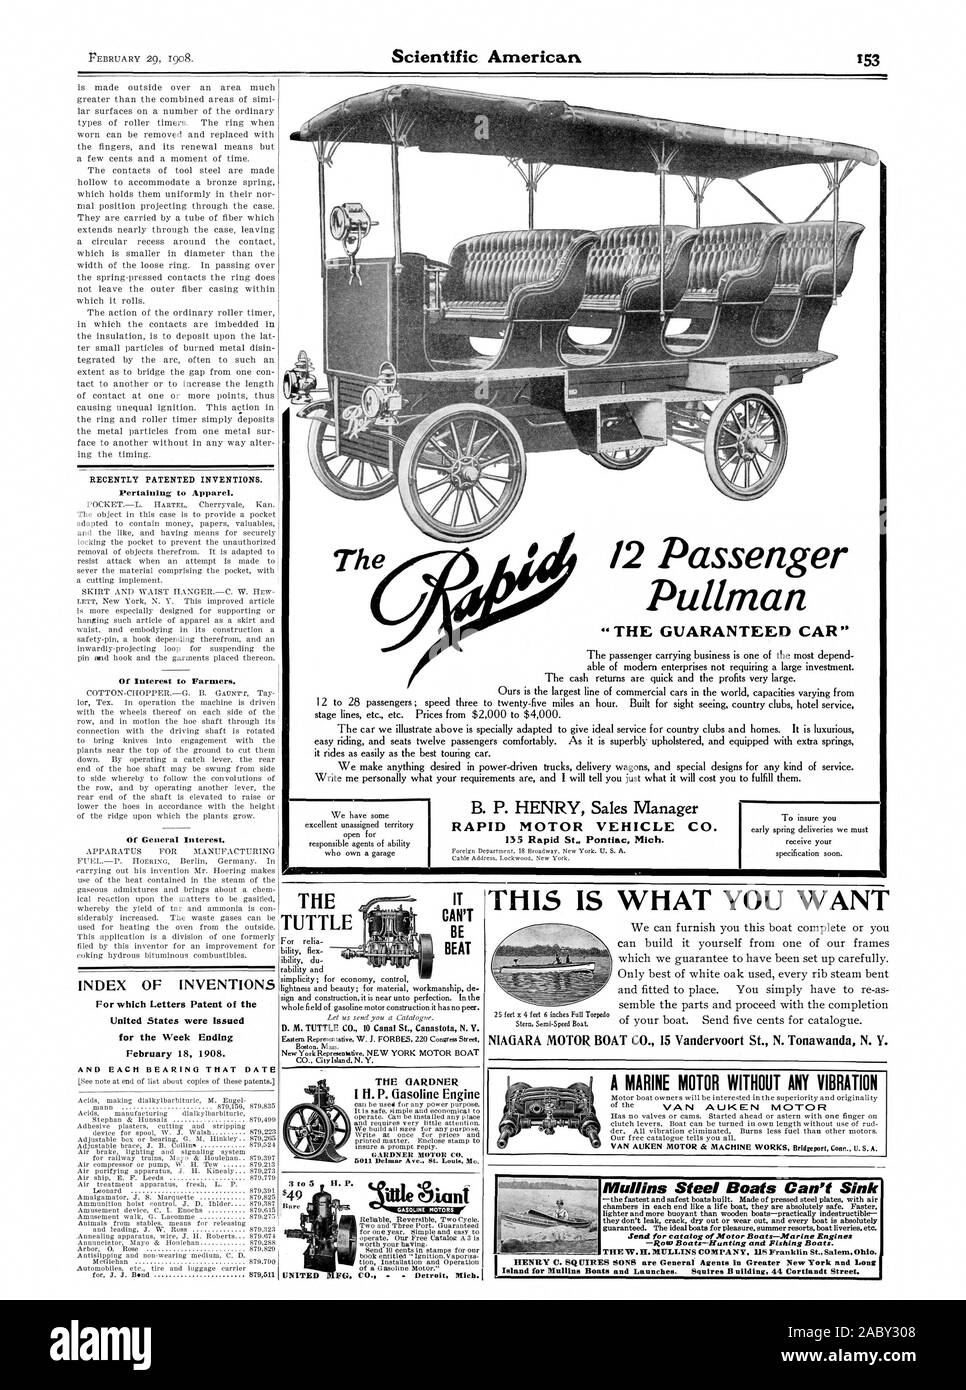 B. P. HENRY Sales Manager RAPID MOTOR VEHICLE CO. 135 Rapid St. Pontiac Mich. RECENTLY PATENTED INVENTIONS. Pertaining to Apparel. Of Interest to Farmers. Of General Interest. INDEX OF INVENTIONS For which Letters Patent of the United States were Issued for the Week Ending February 18 1908. AND EACH BEARING THAT DATE D. M. TUTTLE CO. 10 Canal St. Canastota N. Y. THE GARDNER GARDNER MOTOR CO. THIS 15 WHAT YOU WANT NIAGARA MOTOR BOAT CO. 15 Vandervoort St. N. Tonawanda N. Y. A MARINE MOTOR WITHOUT ANY VIBRATION Mullins Steel Boats Can't Sink Send for catalog of Motor Boats—Marine Engines —Rom Stock Photo